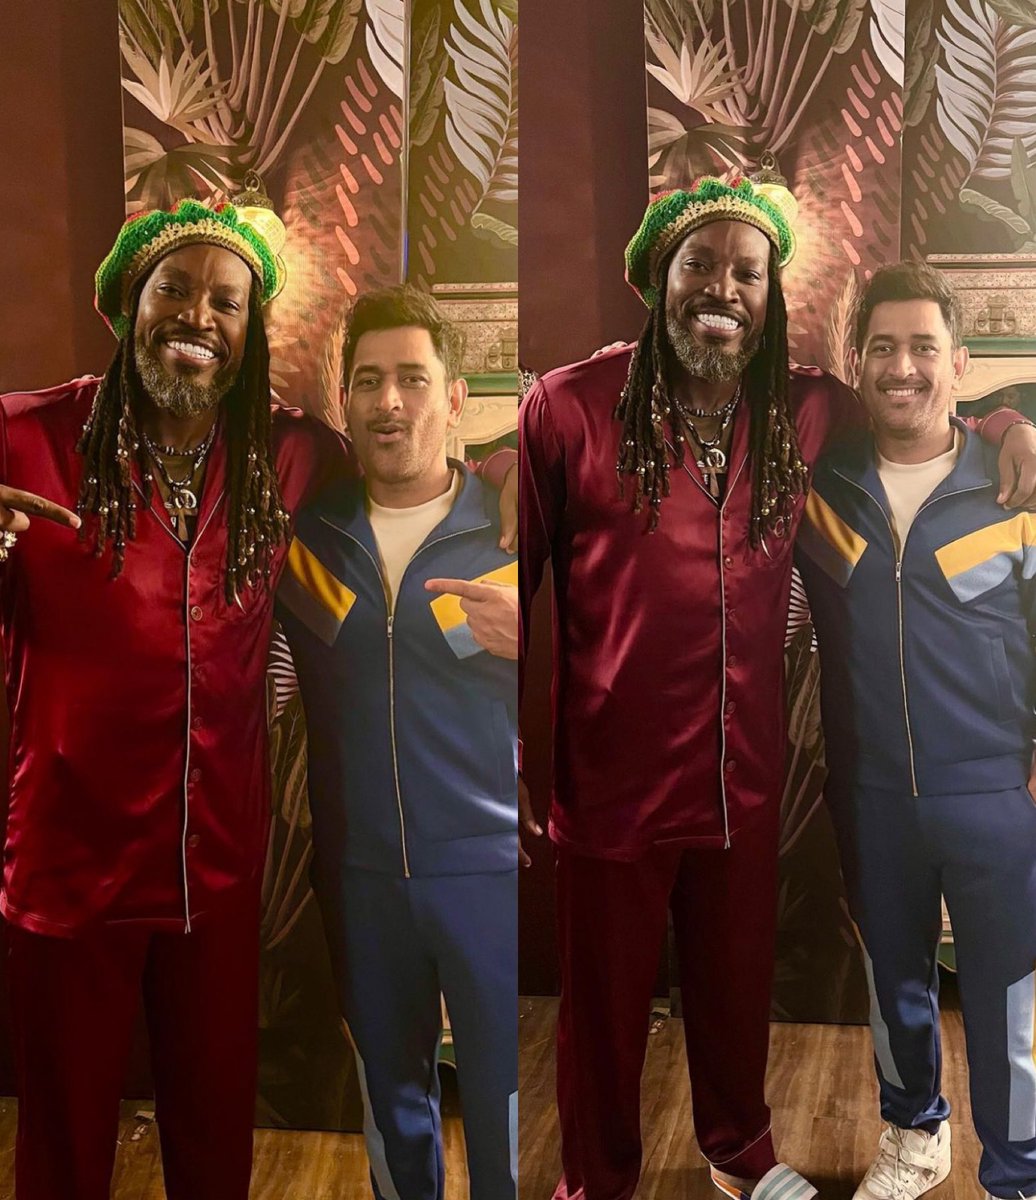 MS Dhoni and Chris Gayle during a shoot in mumbai. 

#Dhoni #gayle #shootdiaries